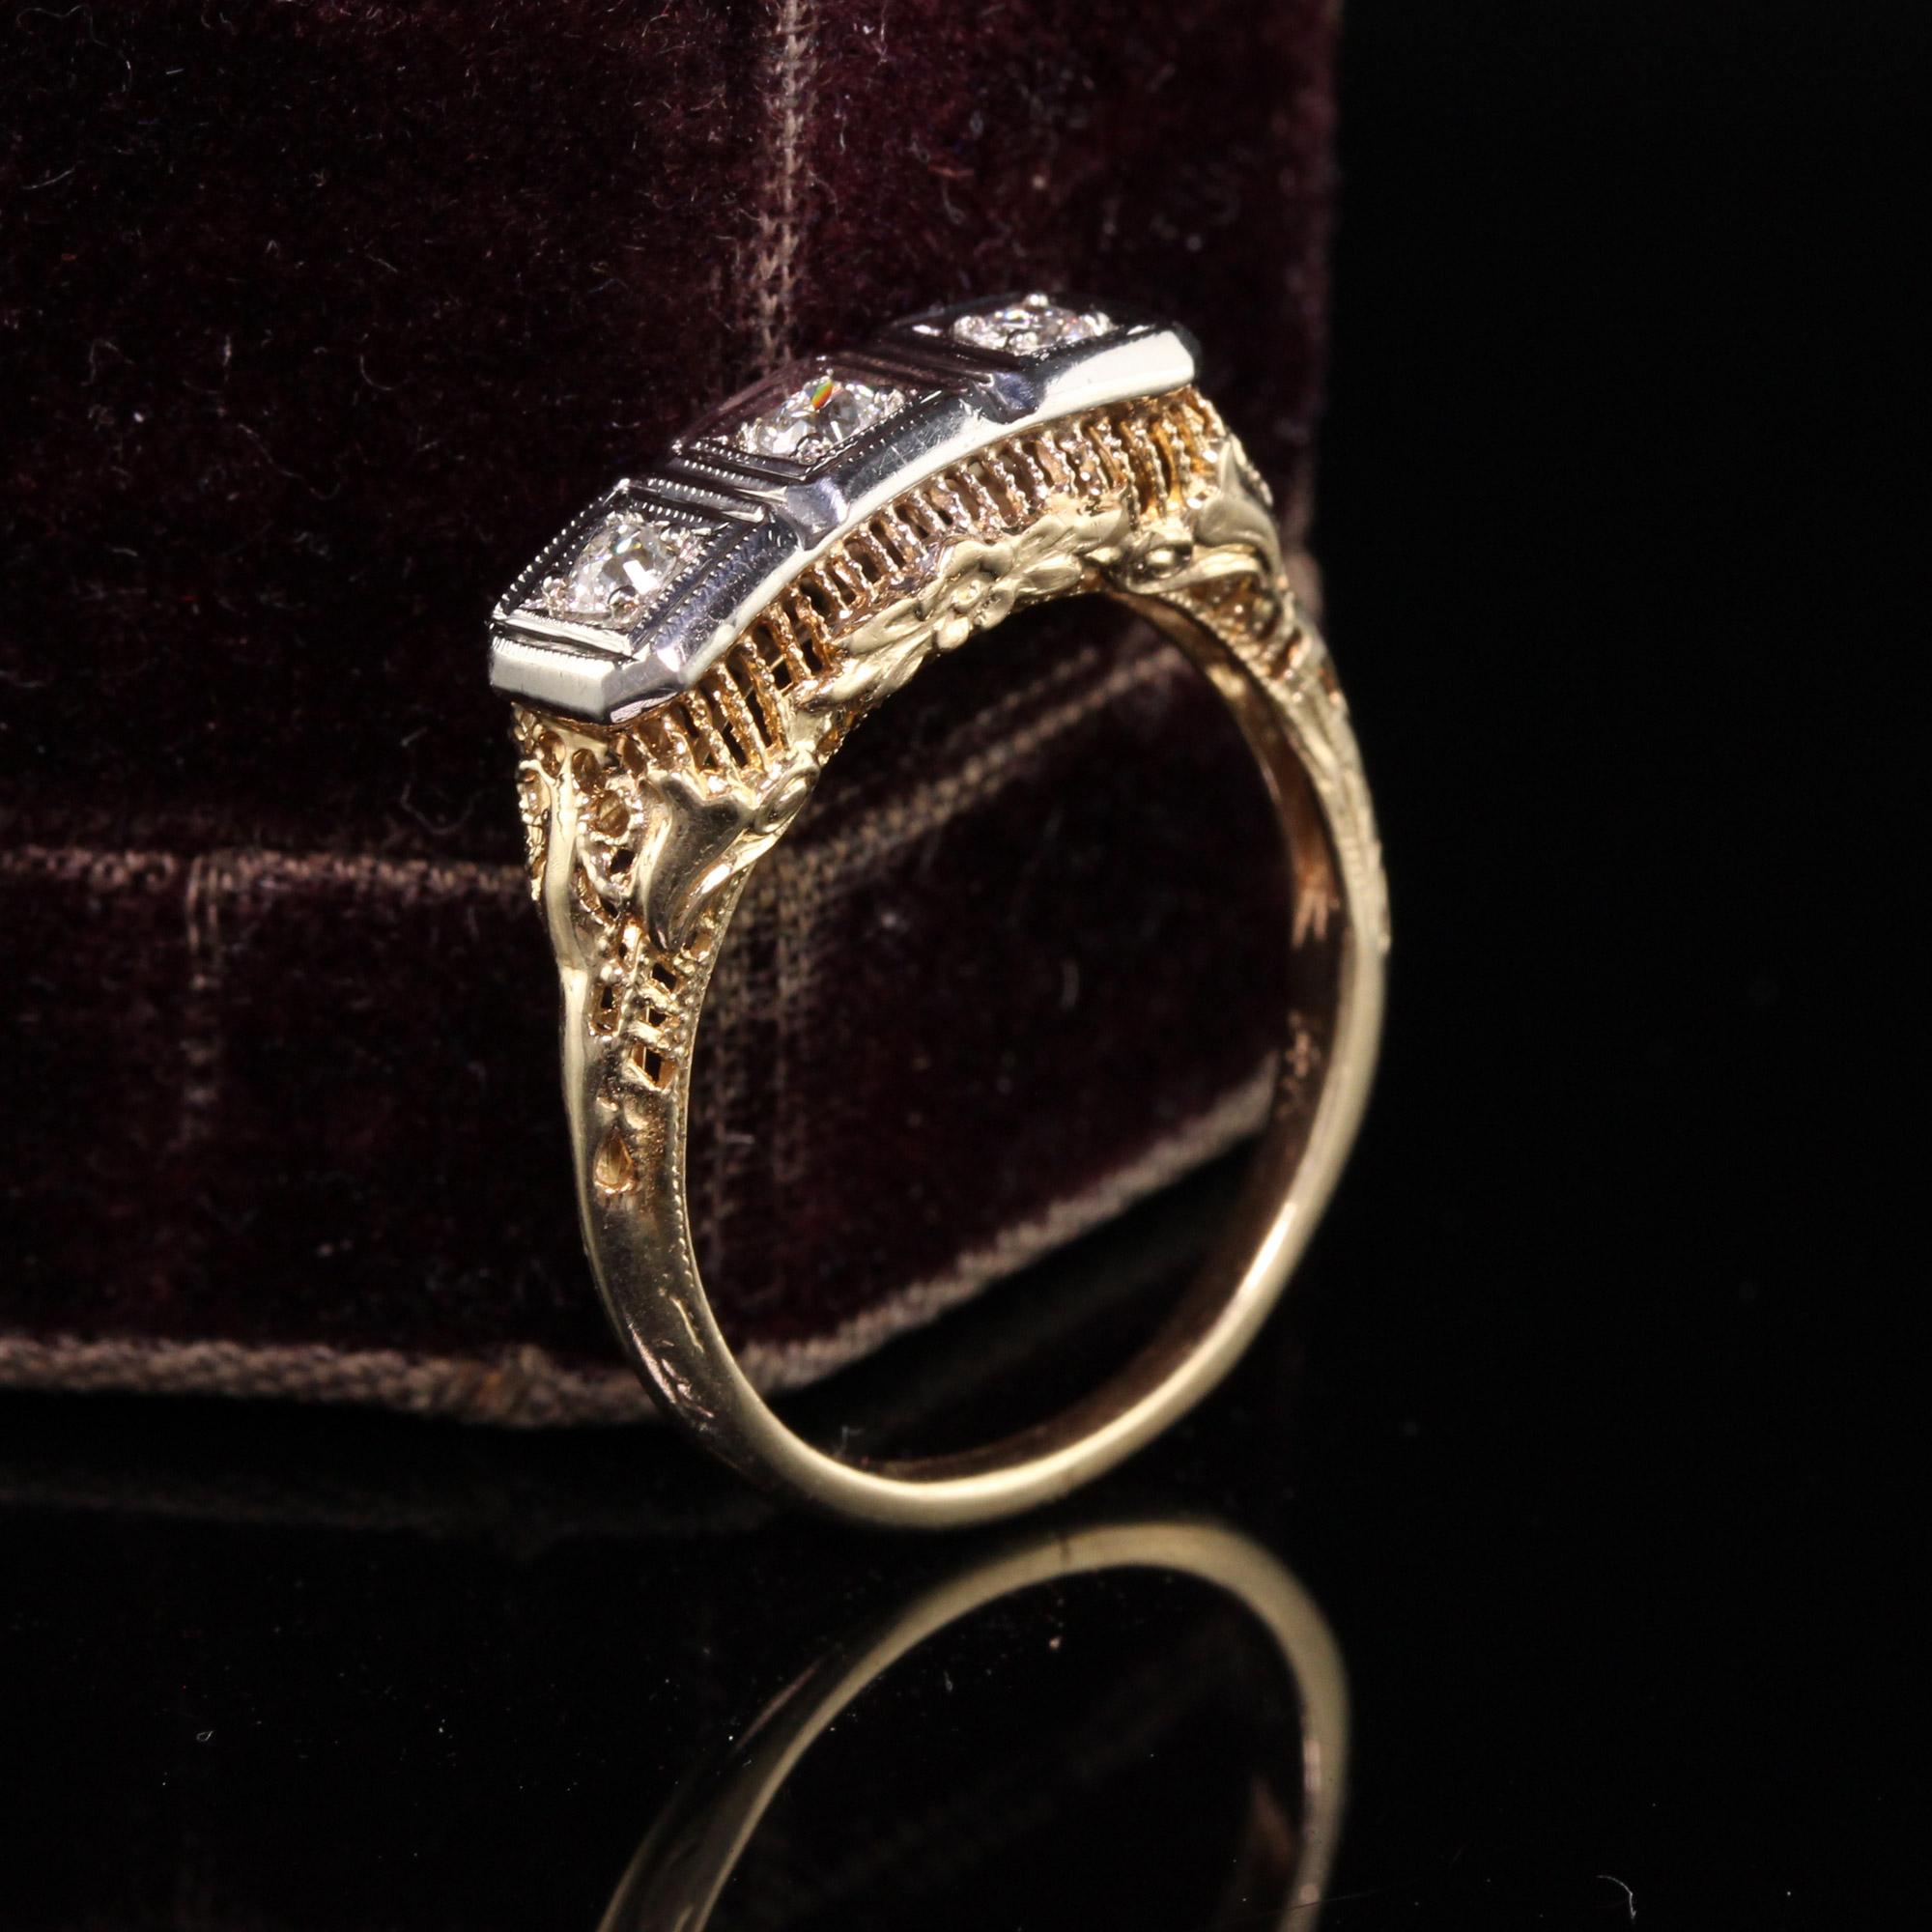 Beautiful Antique Art Deco 14K Yellow Gold Three Stone Diamond Filigree Ring. This gorgeous ring is in incredible condition and features 3 old european cut diamonds on the top.

Item #R0909

Metal: 14K Yellow Gold and White Gold Top

Weight: 2.8